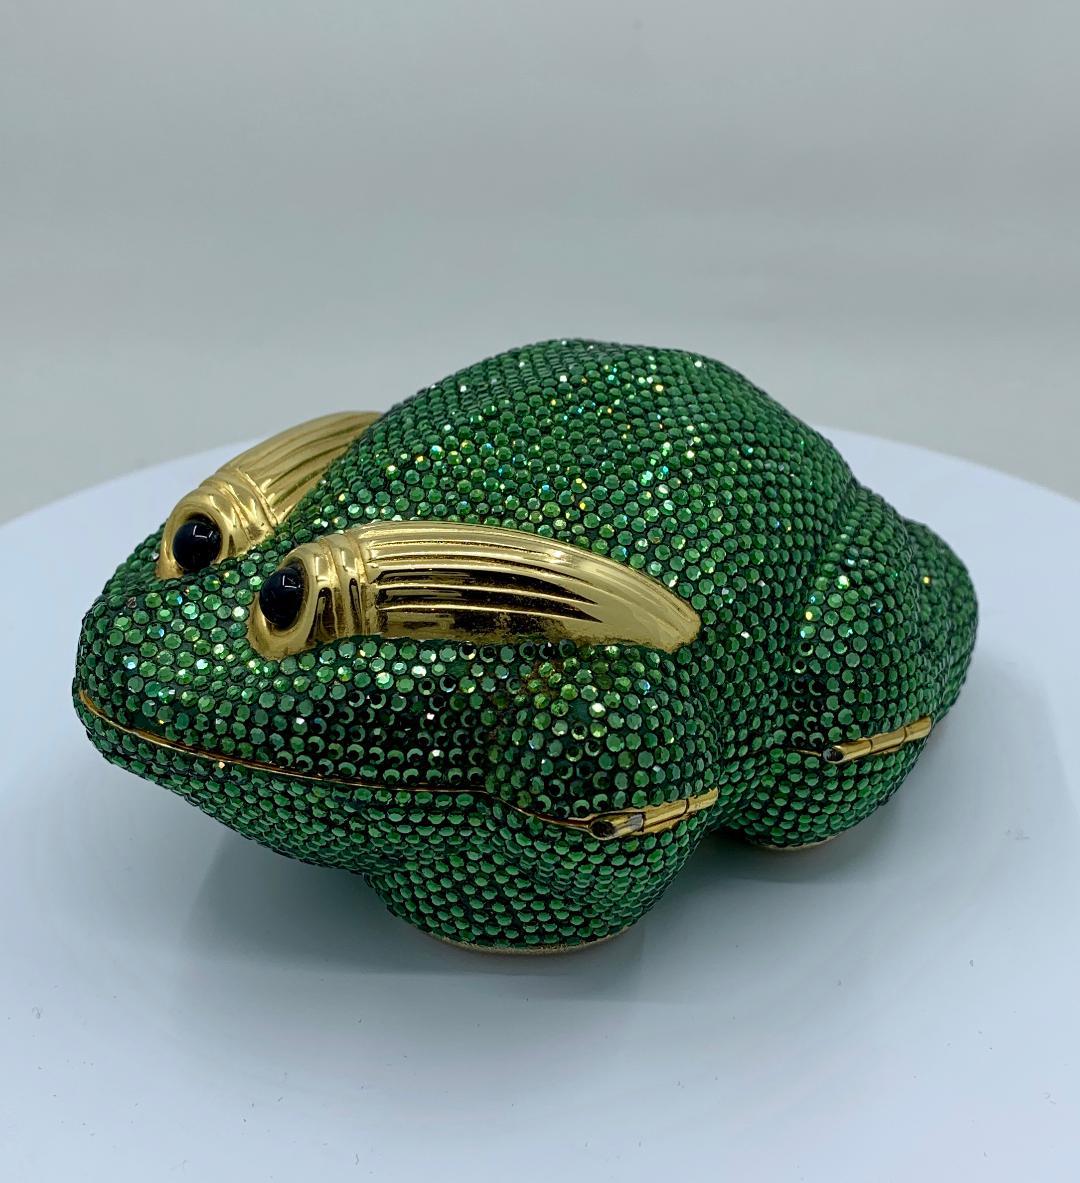 Fabulous handmade couture designer, Judith Leiber, crystal Frog minaudiere evening bag or evening clutch is completely covered in green crystals. Gold toned metal frame with metallic gold leather lined interior with compartments and a long gold